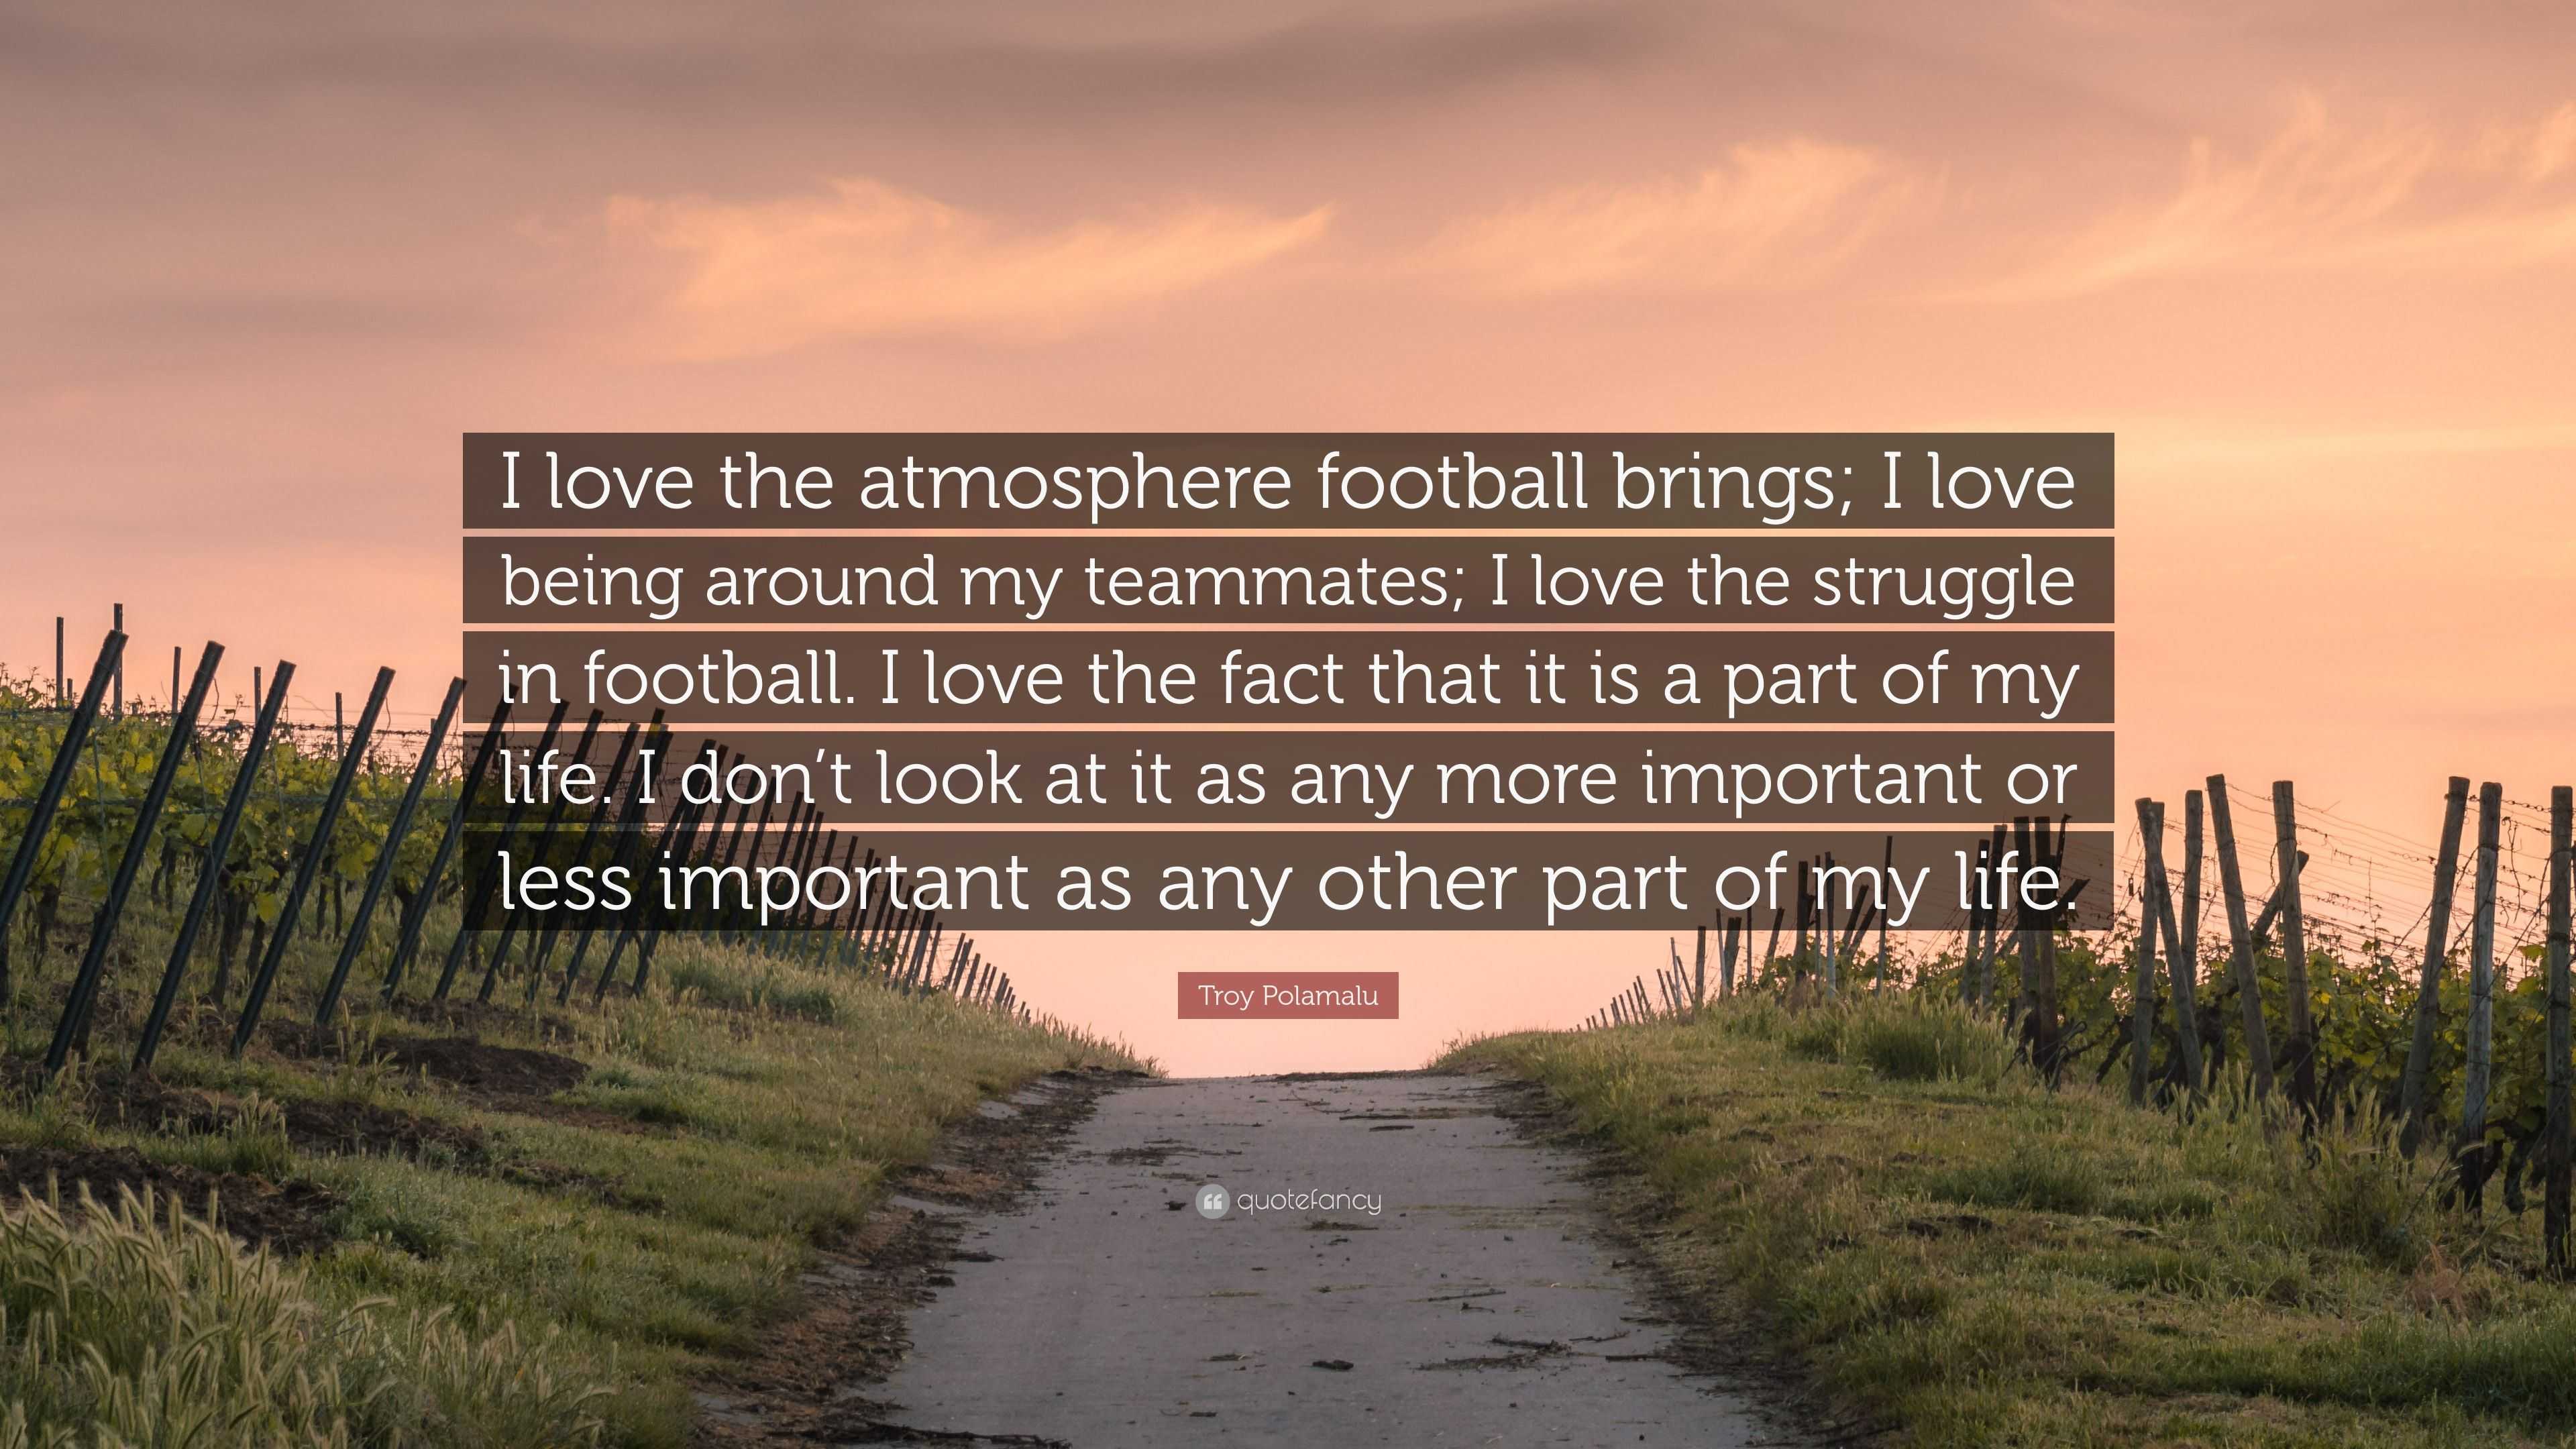 football couple quotes